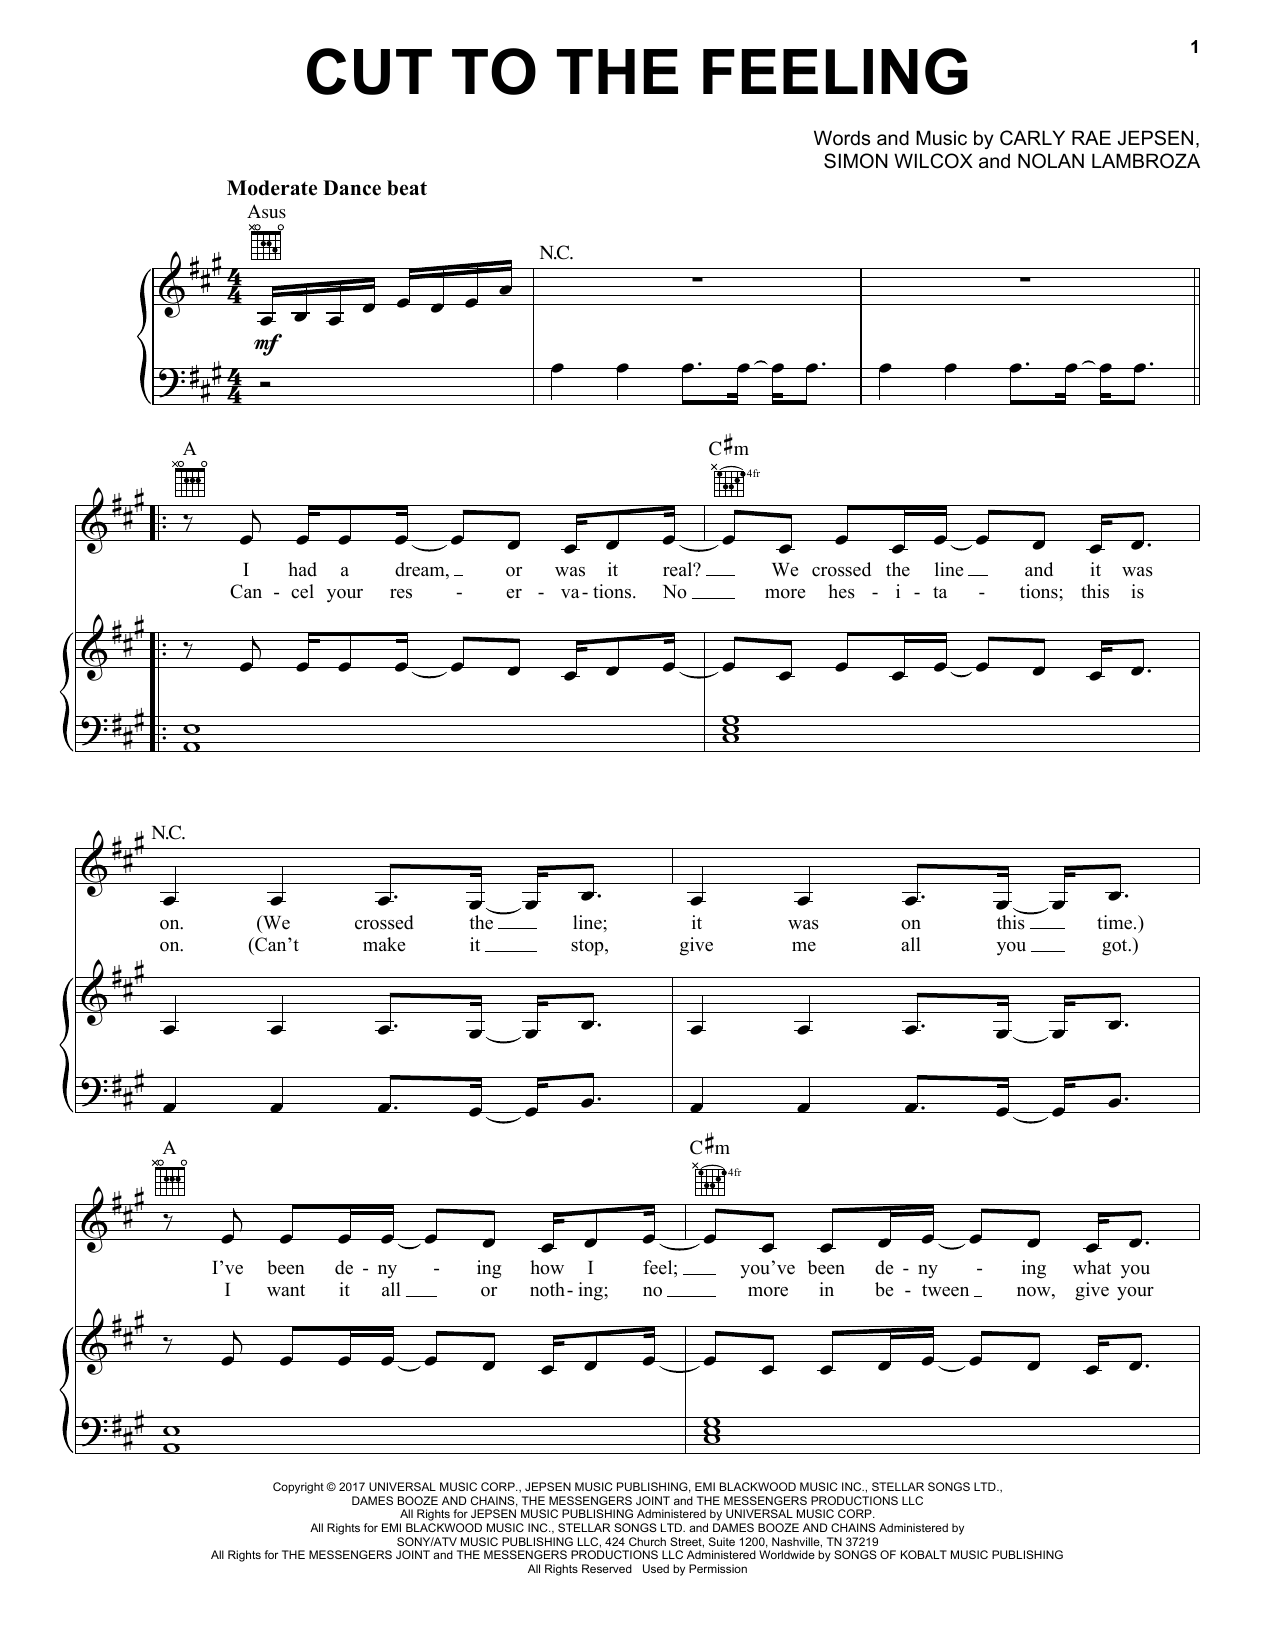 Download Carly Rae Jepsen Cut To The Feeling Sheet Music